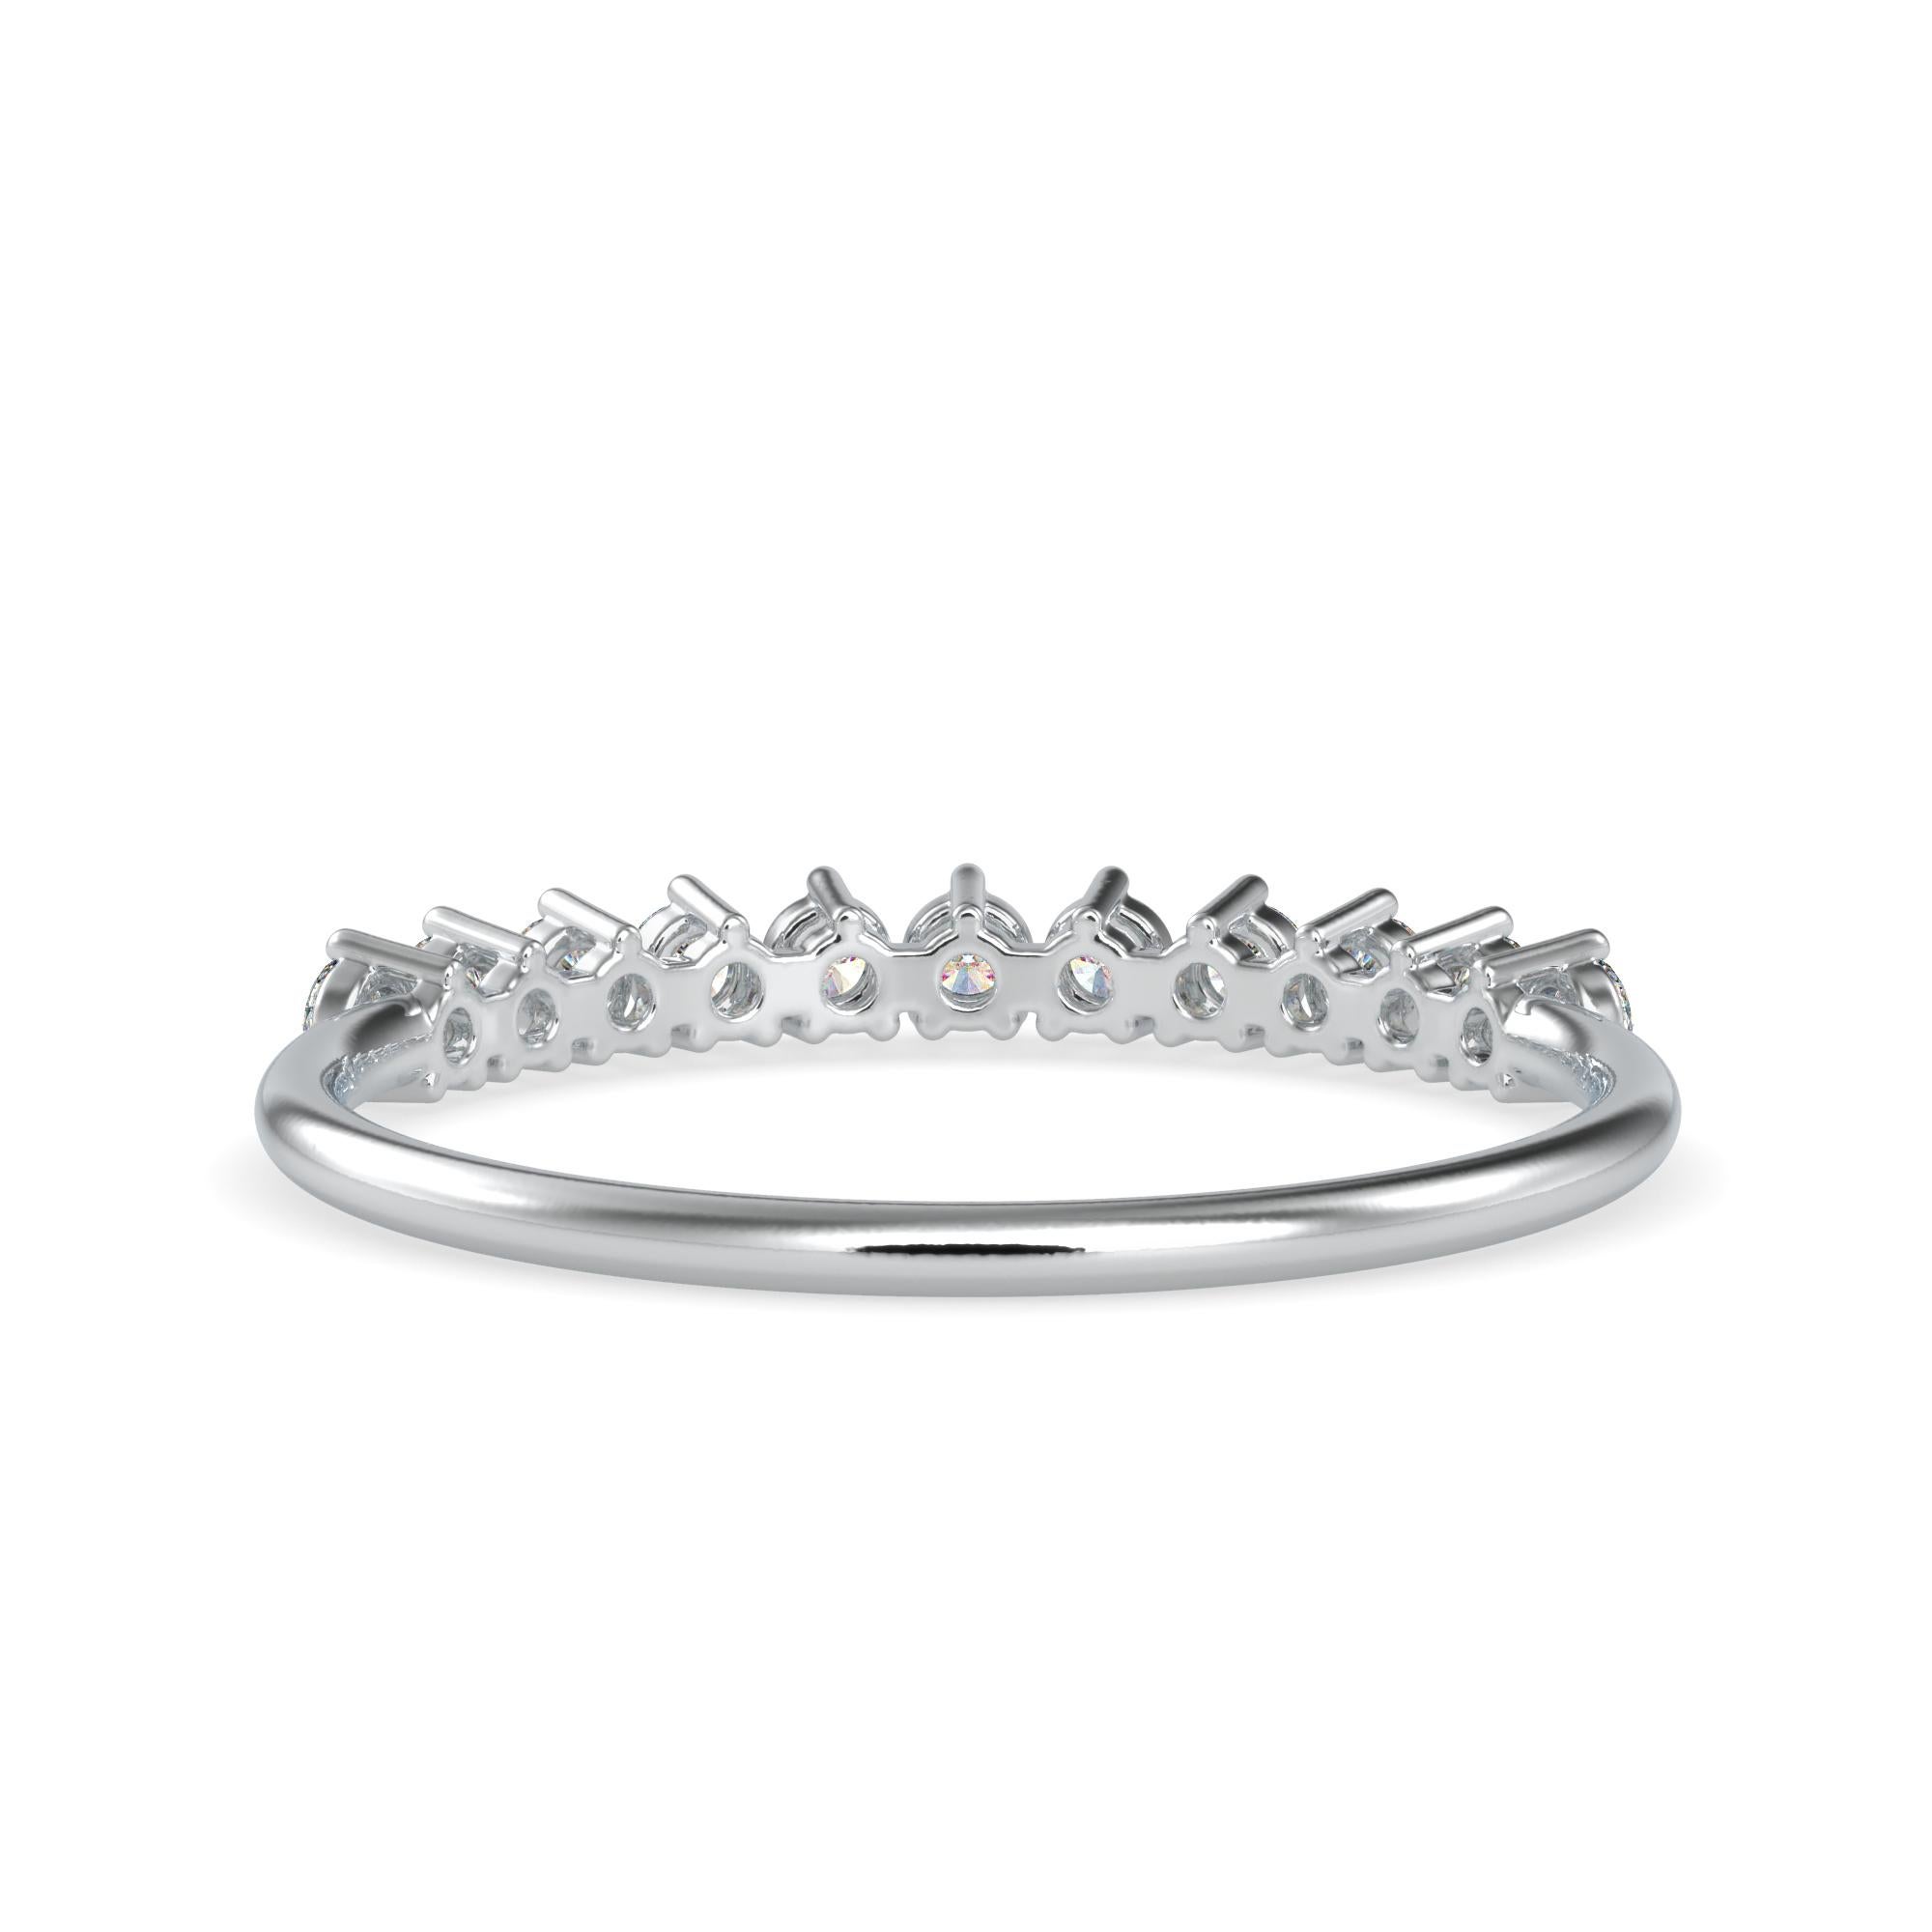 0.24 Carat Diamond 14K White Gold Ring
Stamped: 14K
Total Ring Weight: 1.2 Grams
Diamond Weight: 0.24 Carat (F-G Color, VS2-SI1 Clarity) 1.8 Millimeters 
Diamond Quantity: 11
SKU: [500020]

